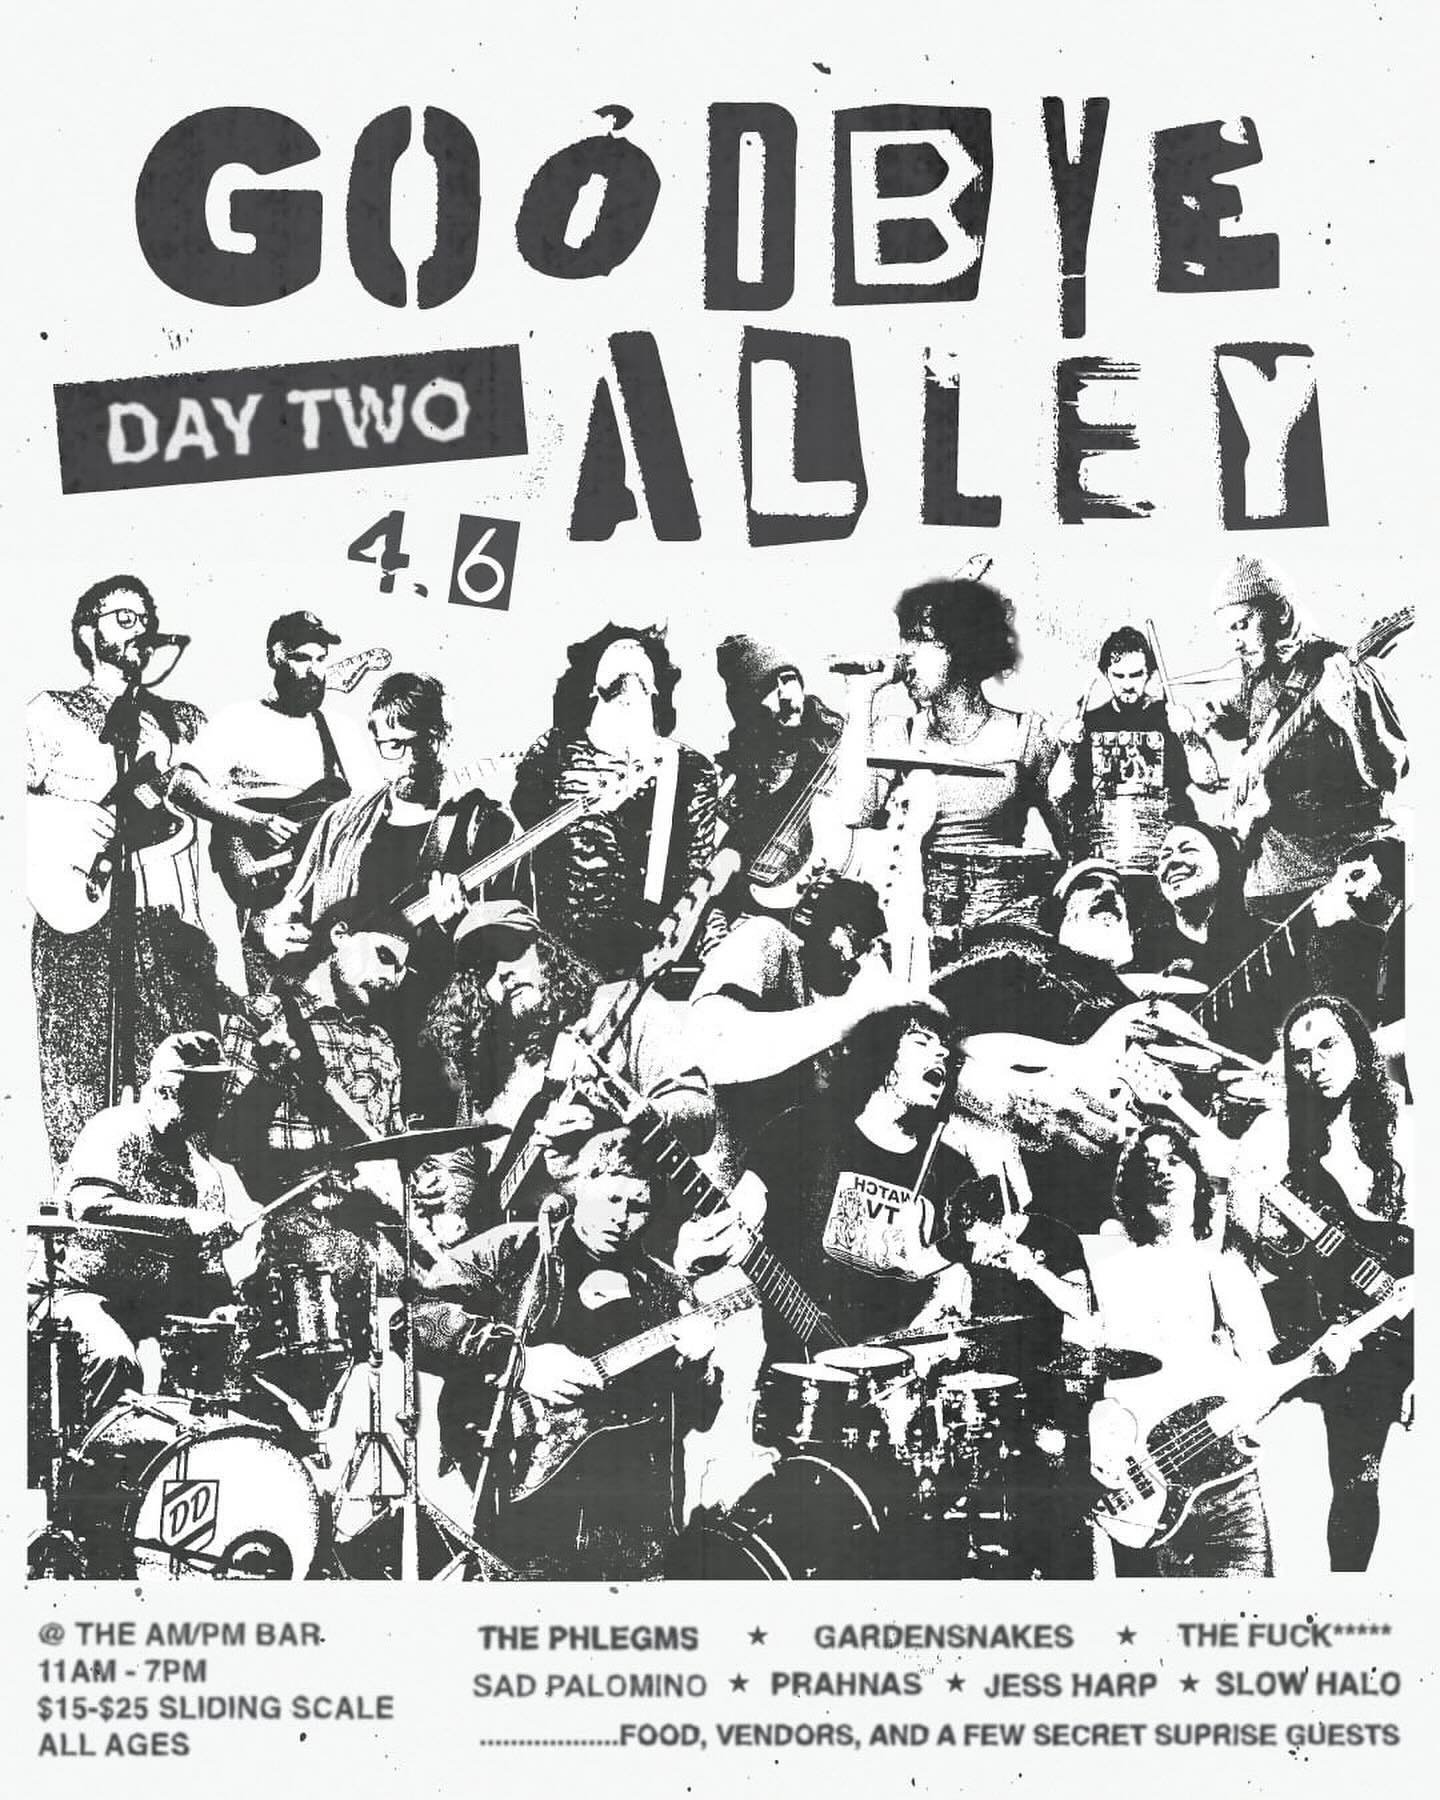 We are HONORED to say the least to be a part of the Goodbye Alley weekend and can&rsquo;t wait to see you there. 🥲🥲🥲

You can find the usual free plan B, condoms, and information at our table along with some handmade goods from some folks in the C